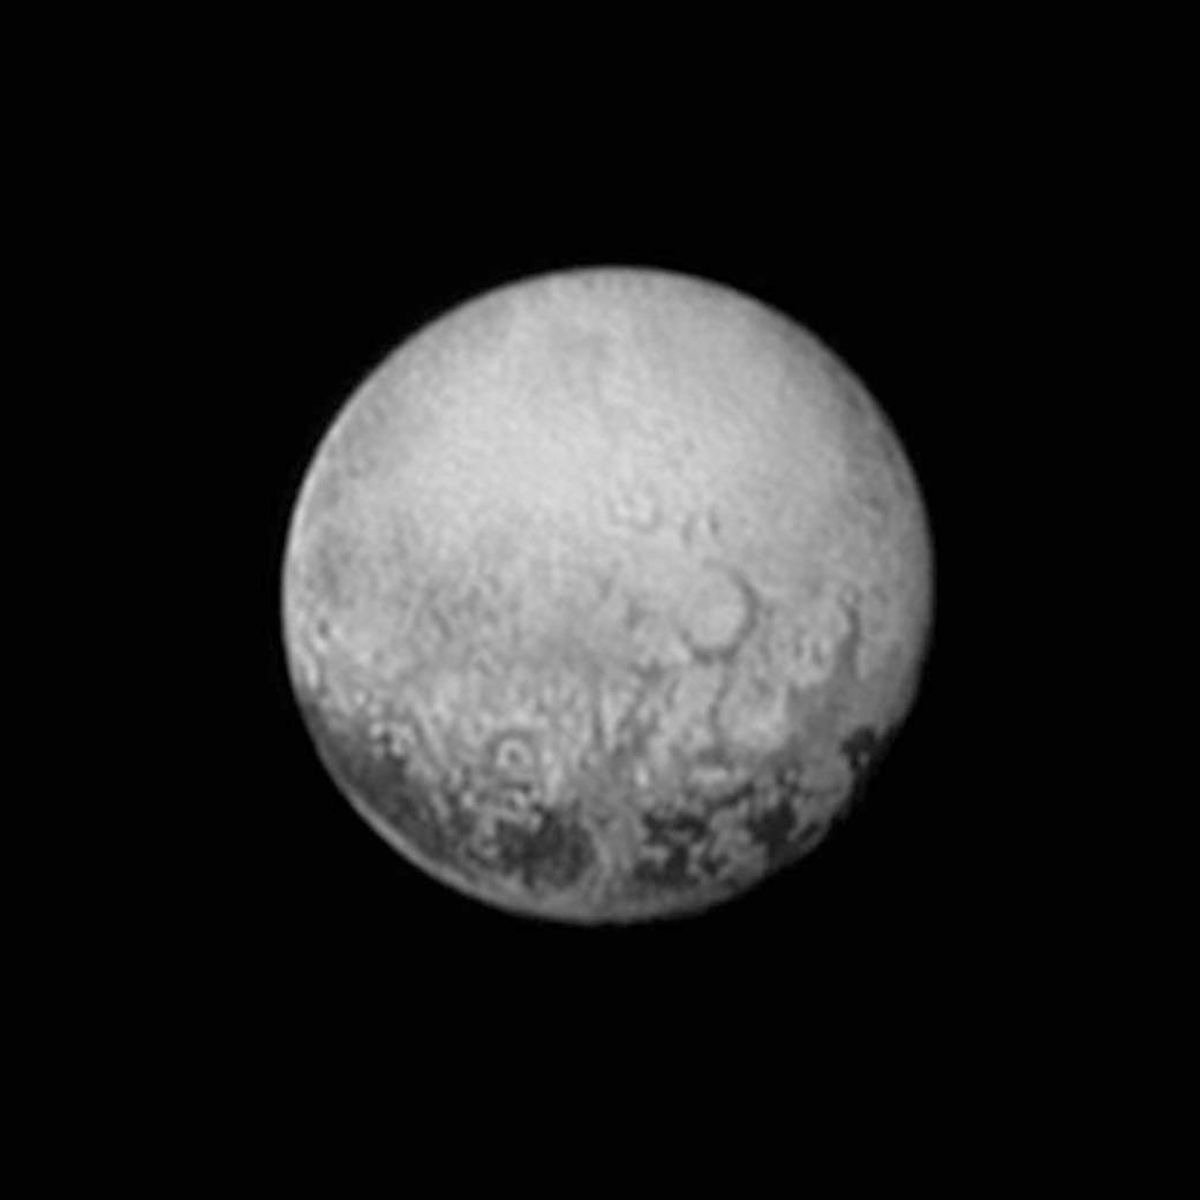 This July 11, 2015, image provided by NASA shows Pluto from the New Horizons spacecraft. (AP)